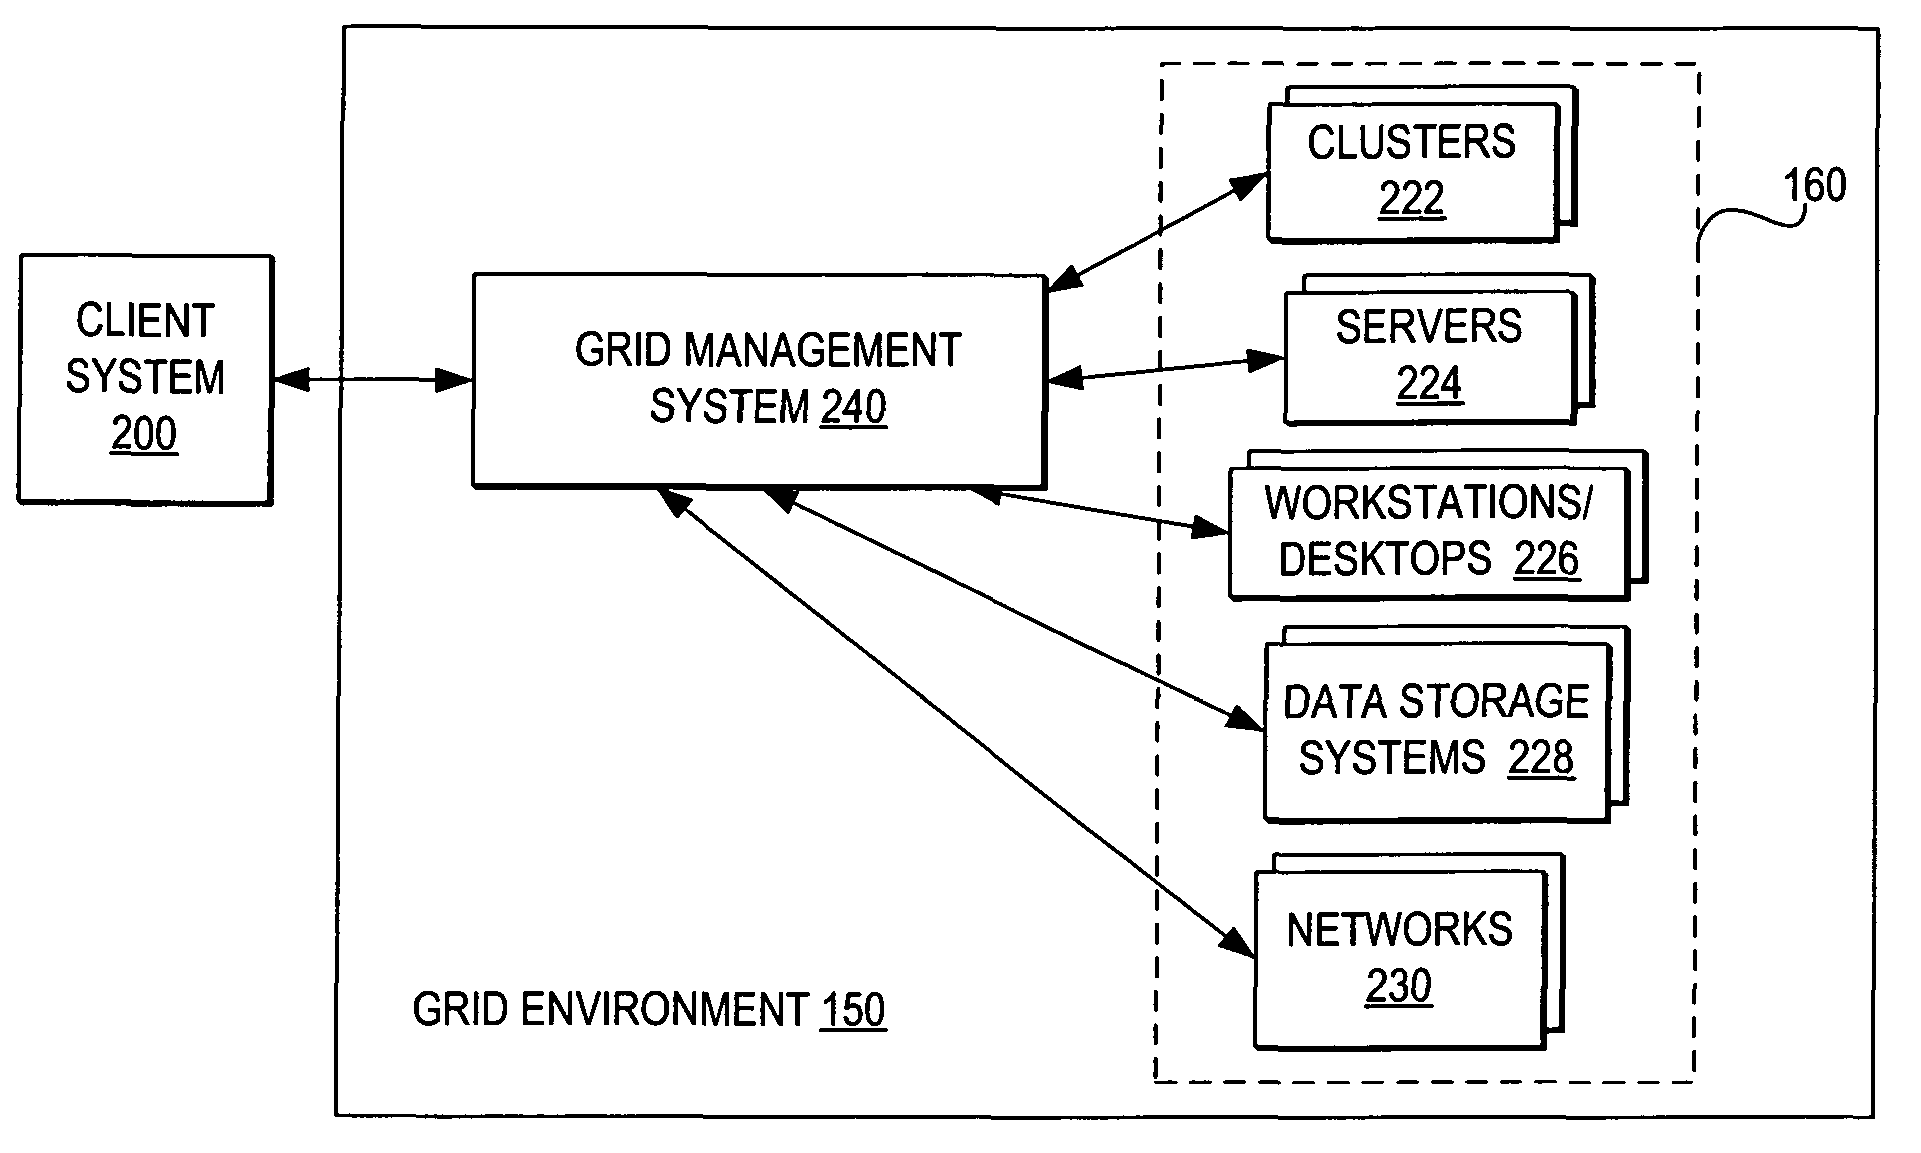 Facilitating overall grid environment management by monitoring and distributing grid activity